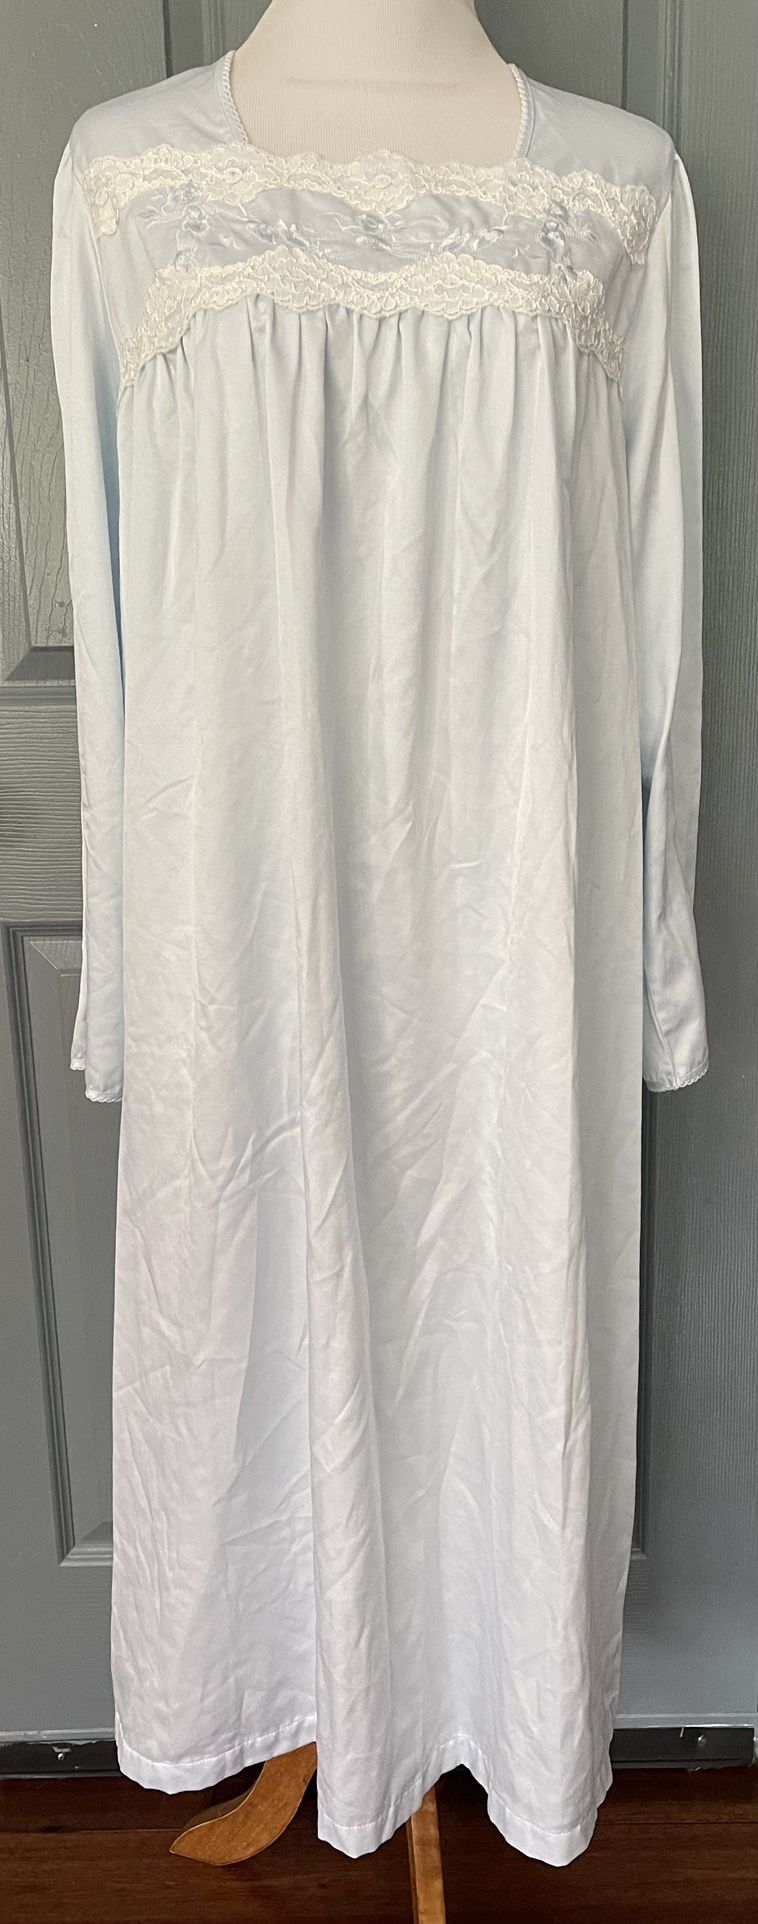 Miss Elaine Blue Brushed Satin Lace Trim Nightgown.  Size XL